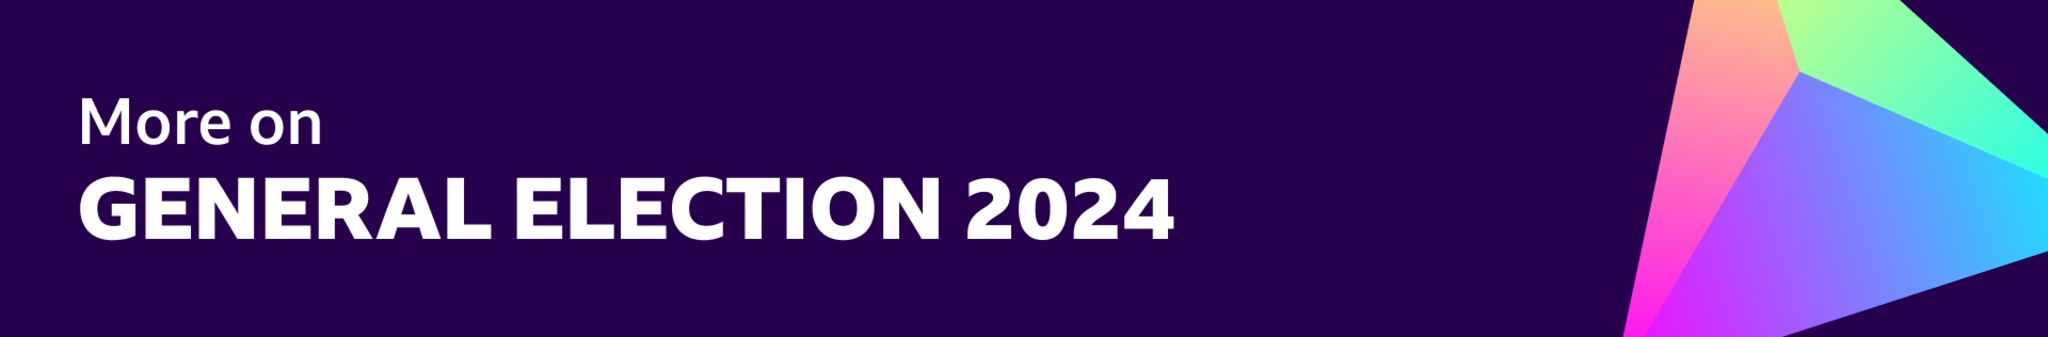 BBC website banner reading "More on general Election 2024" on a purple background